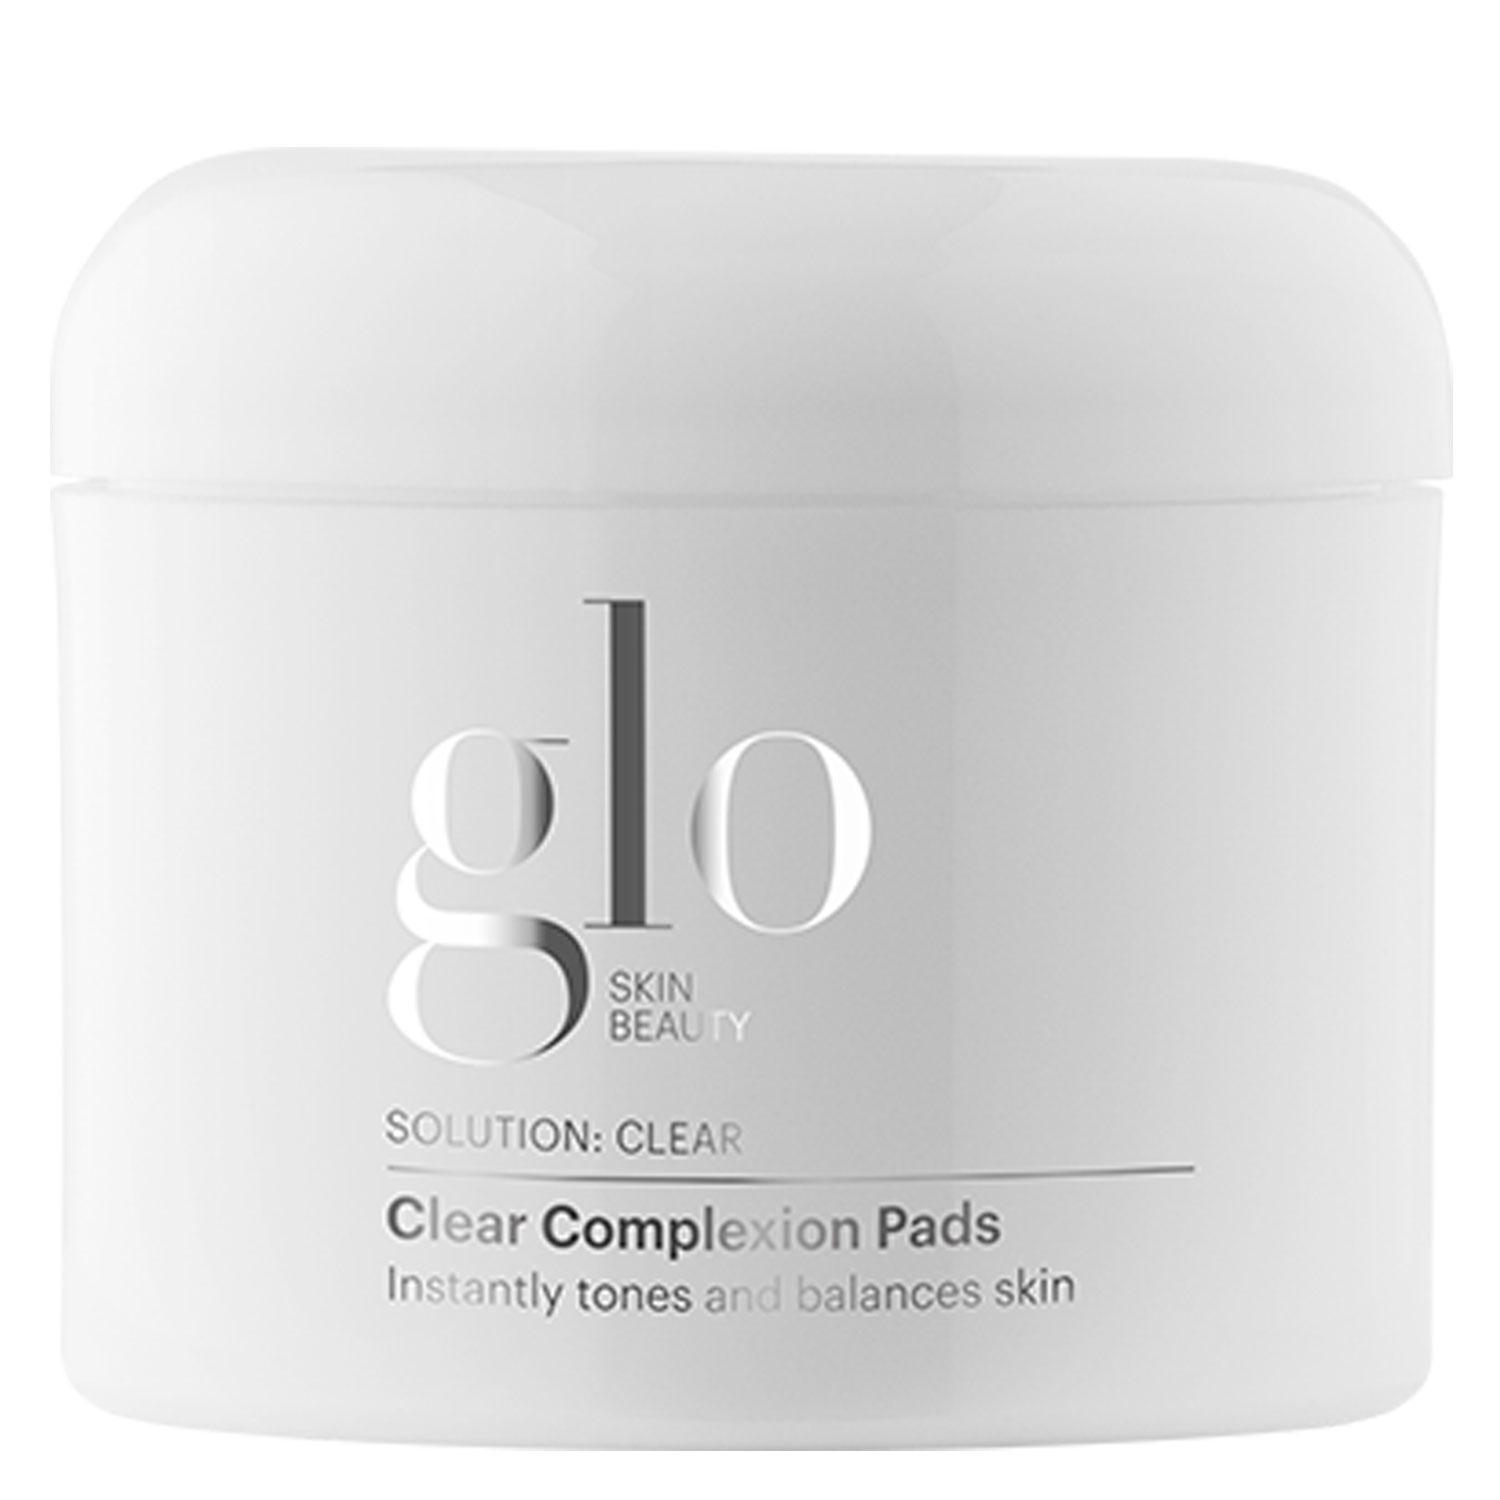 Glo Skin Beauty Care - Clear Complexion Pads